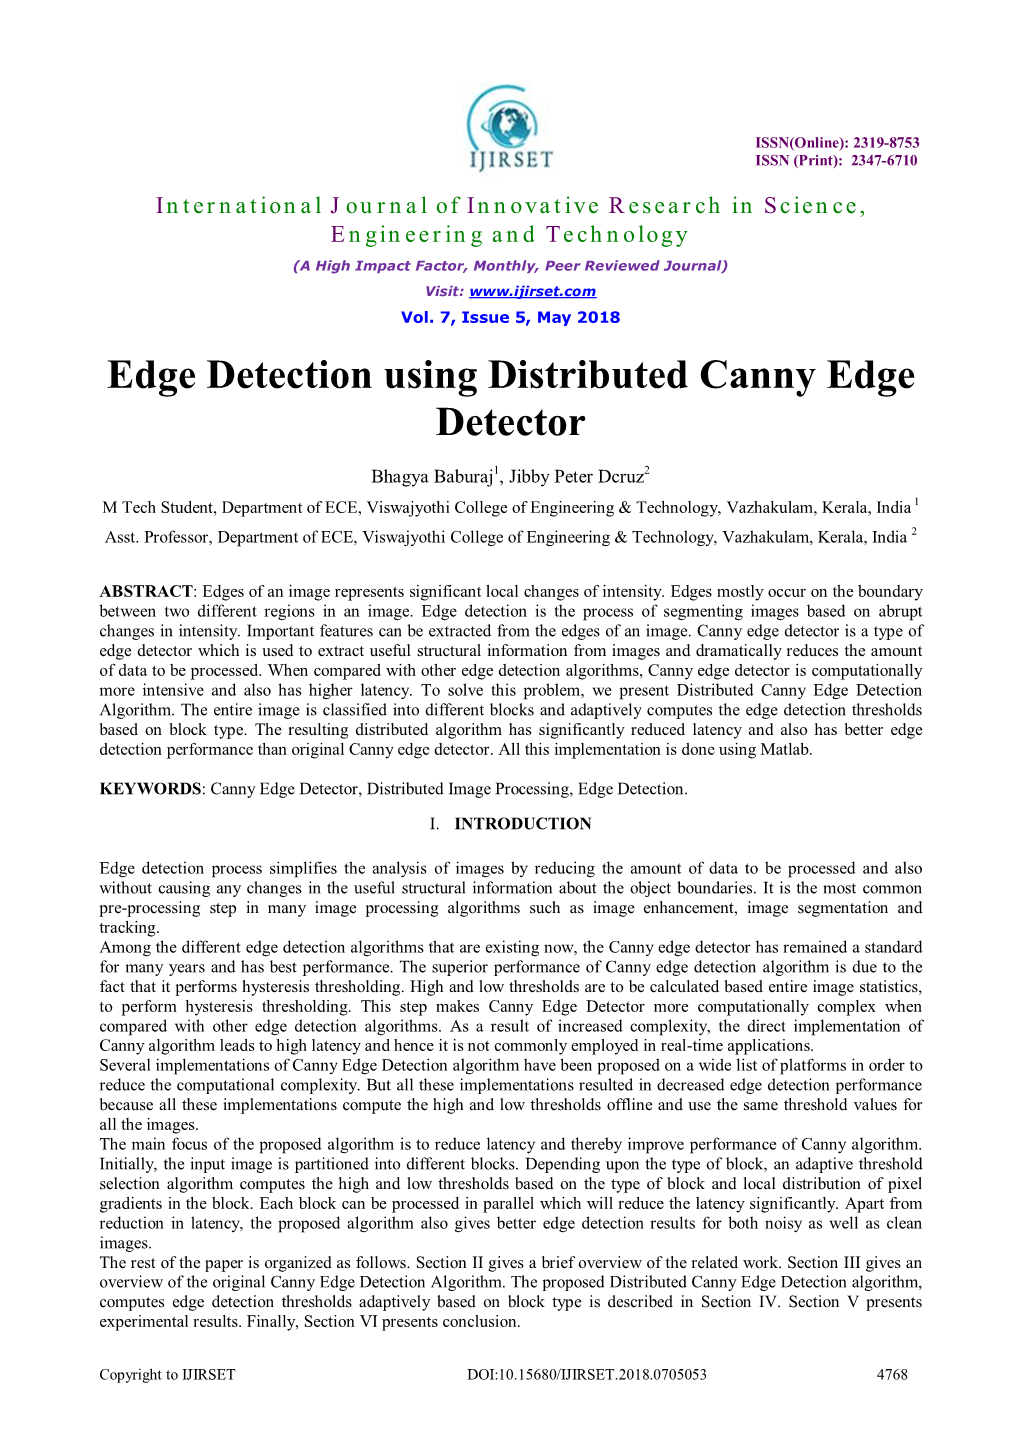 Edge Detection Using Distributed Canny Edge Detector